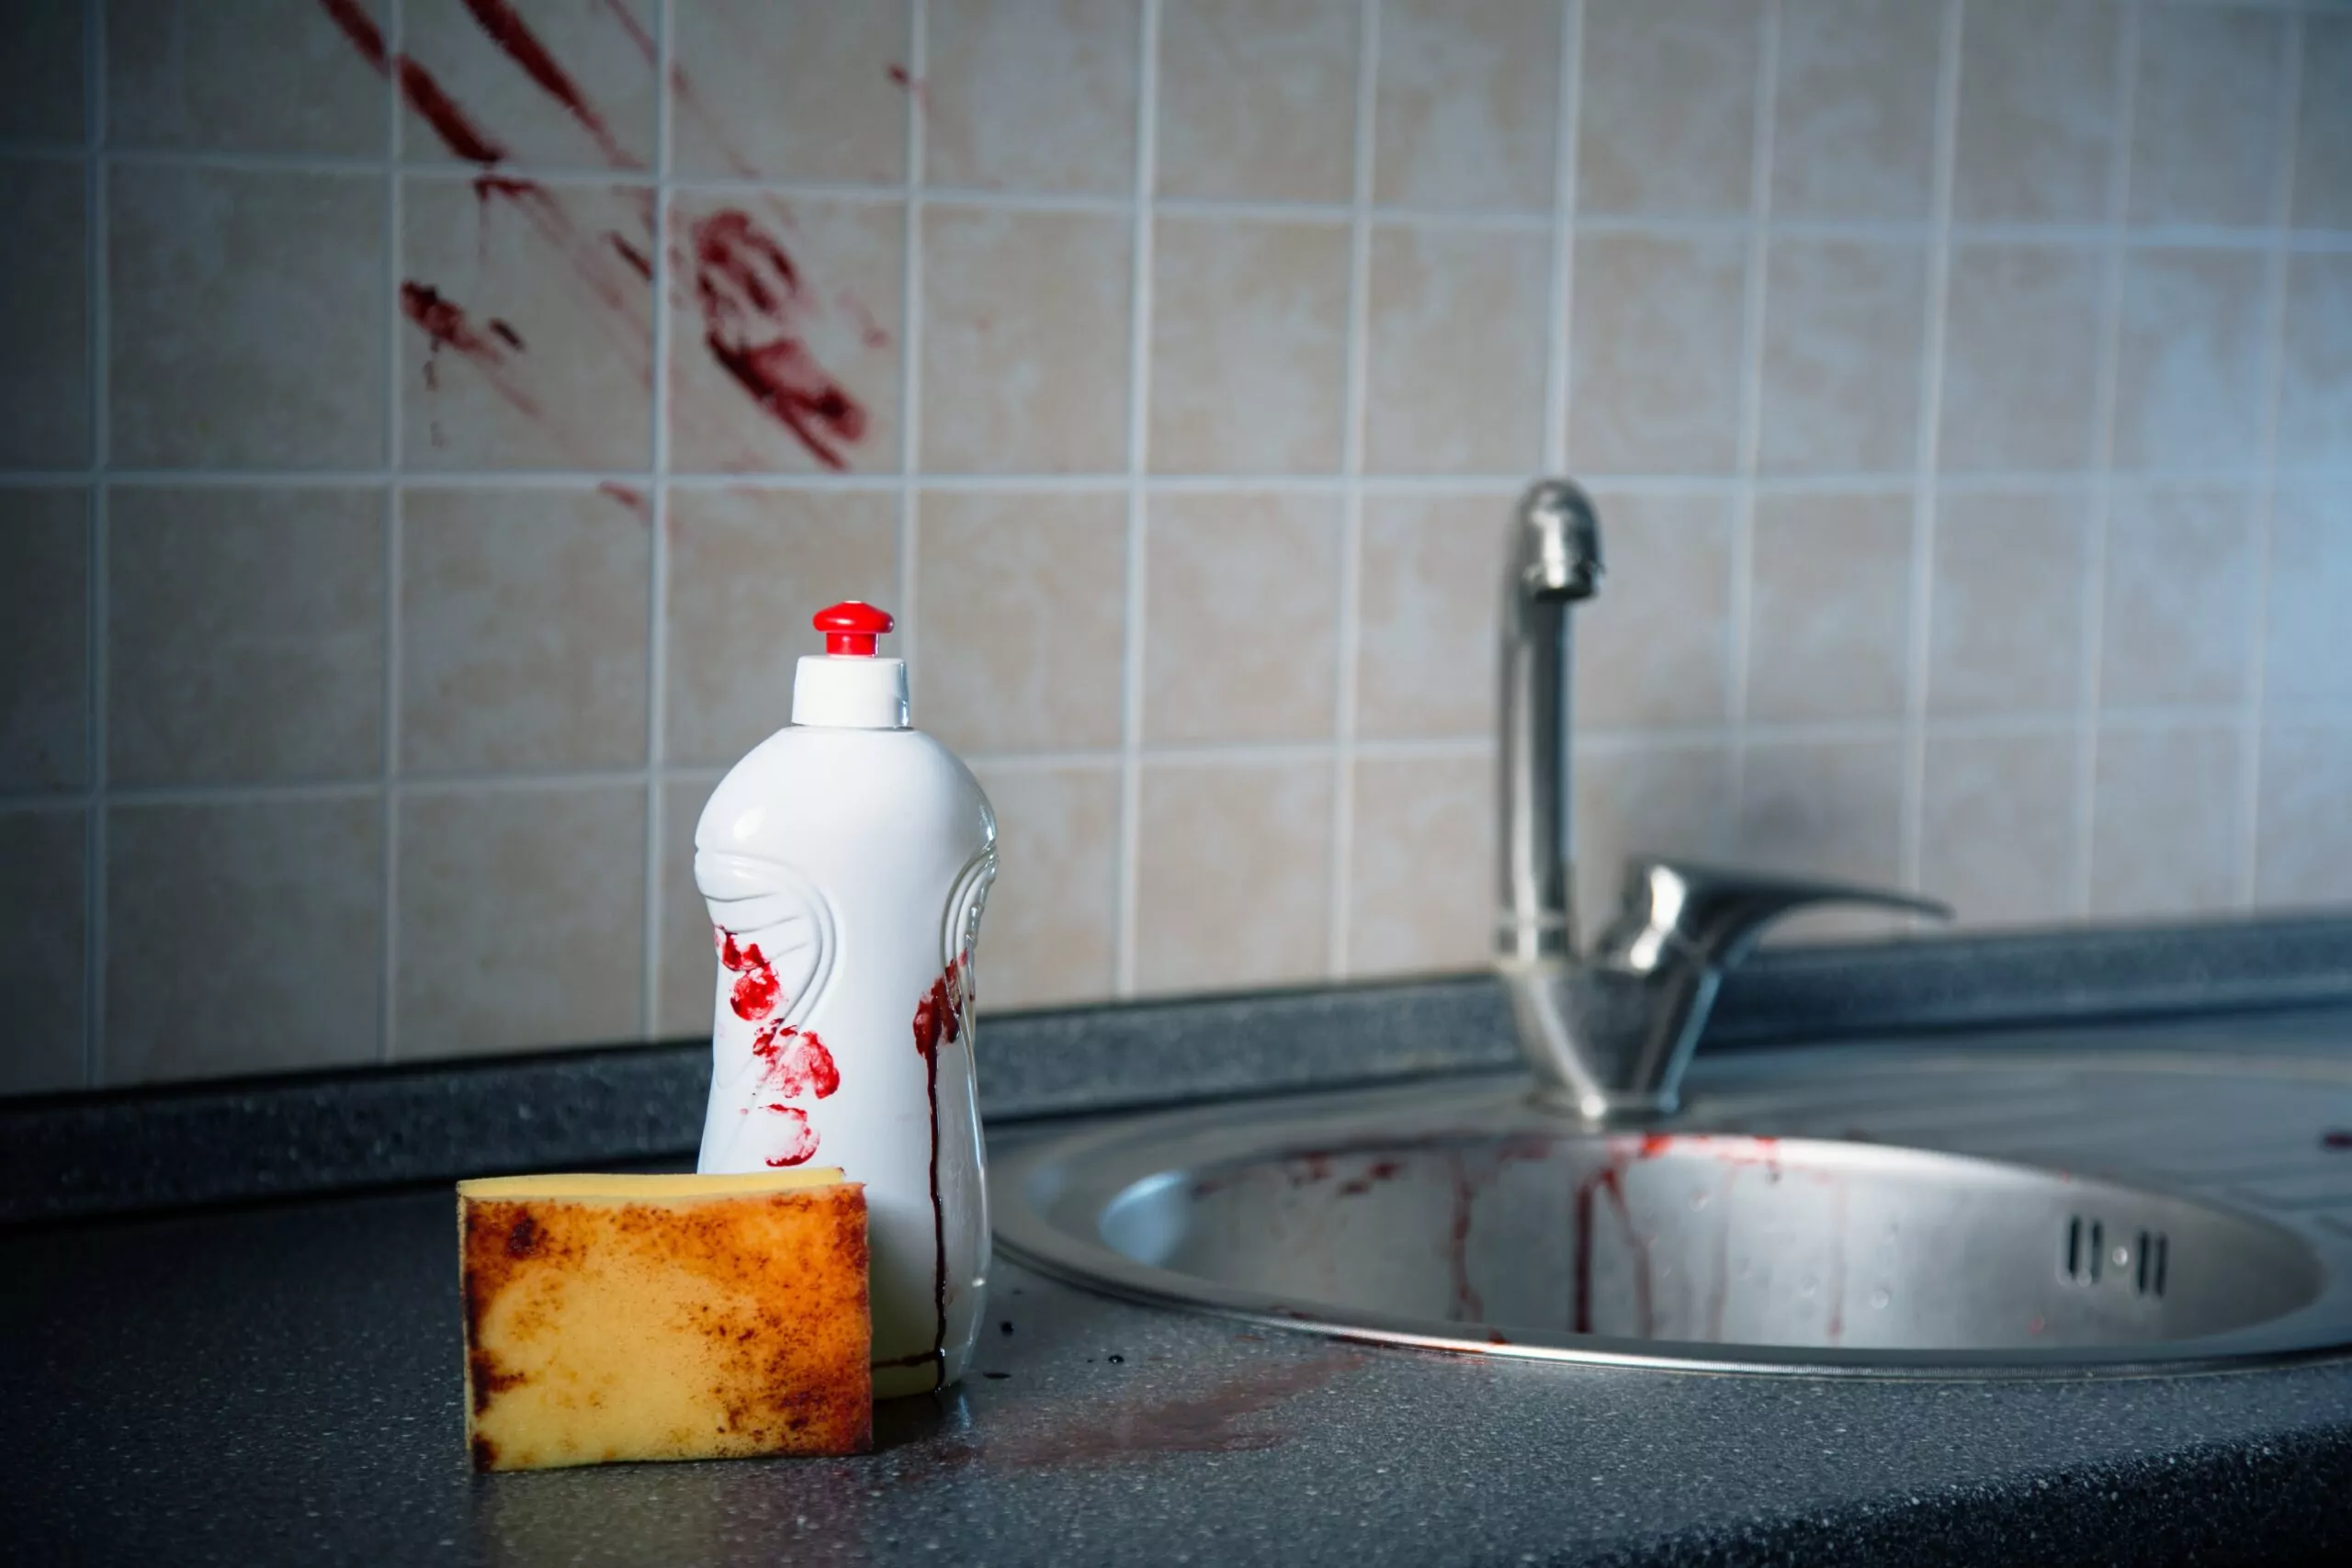 crime scene and cleaning products